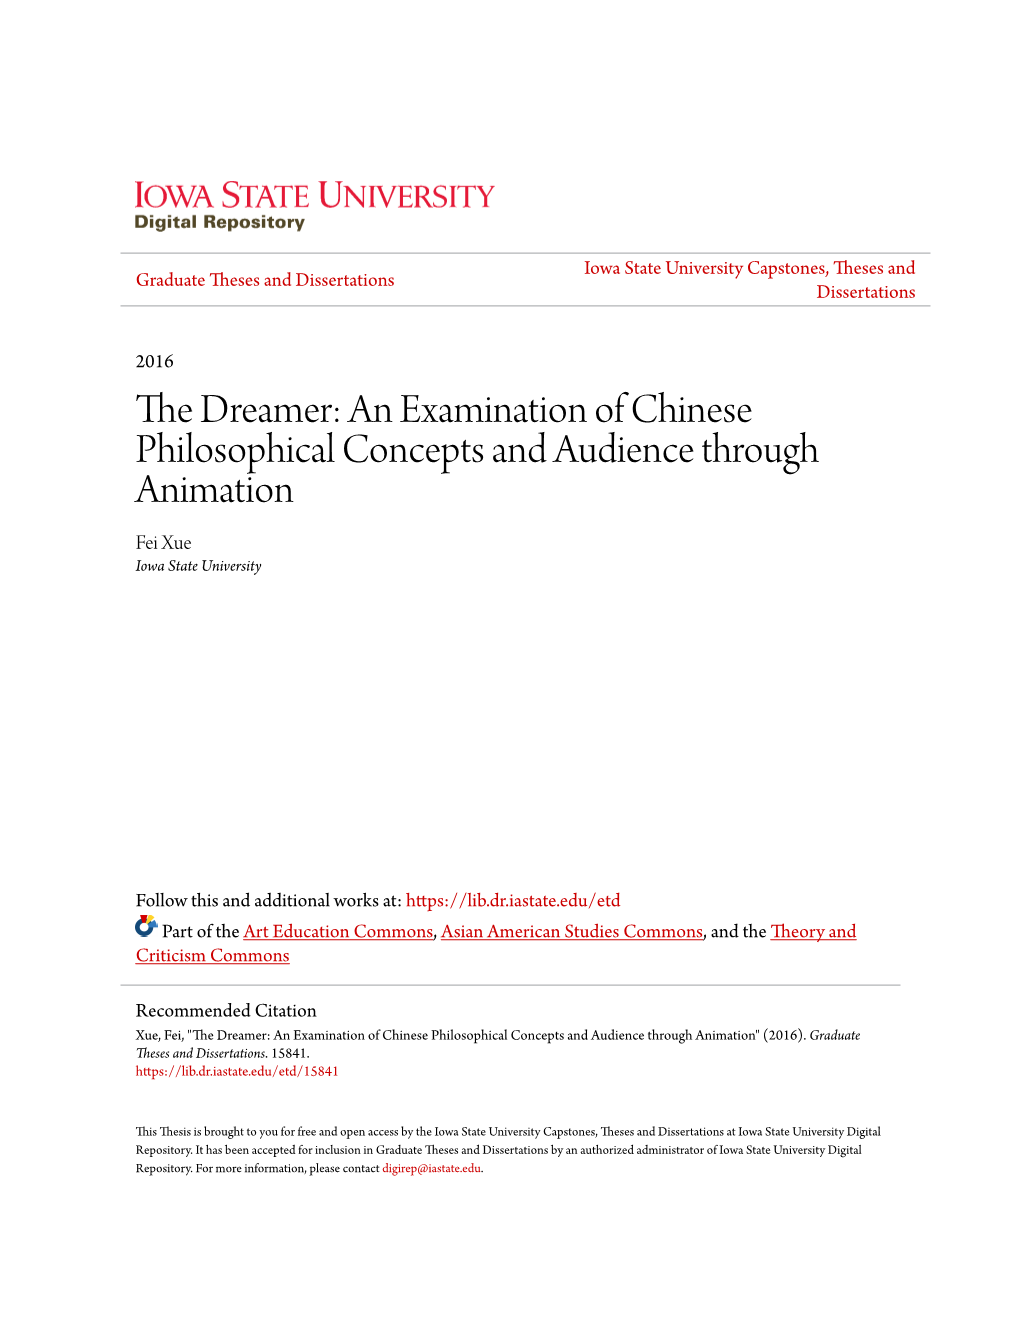 An Examination of Chinese Philosophical Concepts and Audience Through Animation Fei Xue Iowa State University